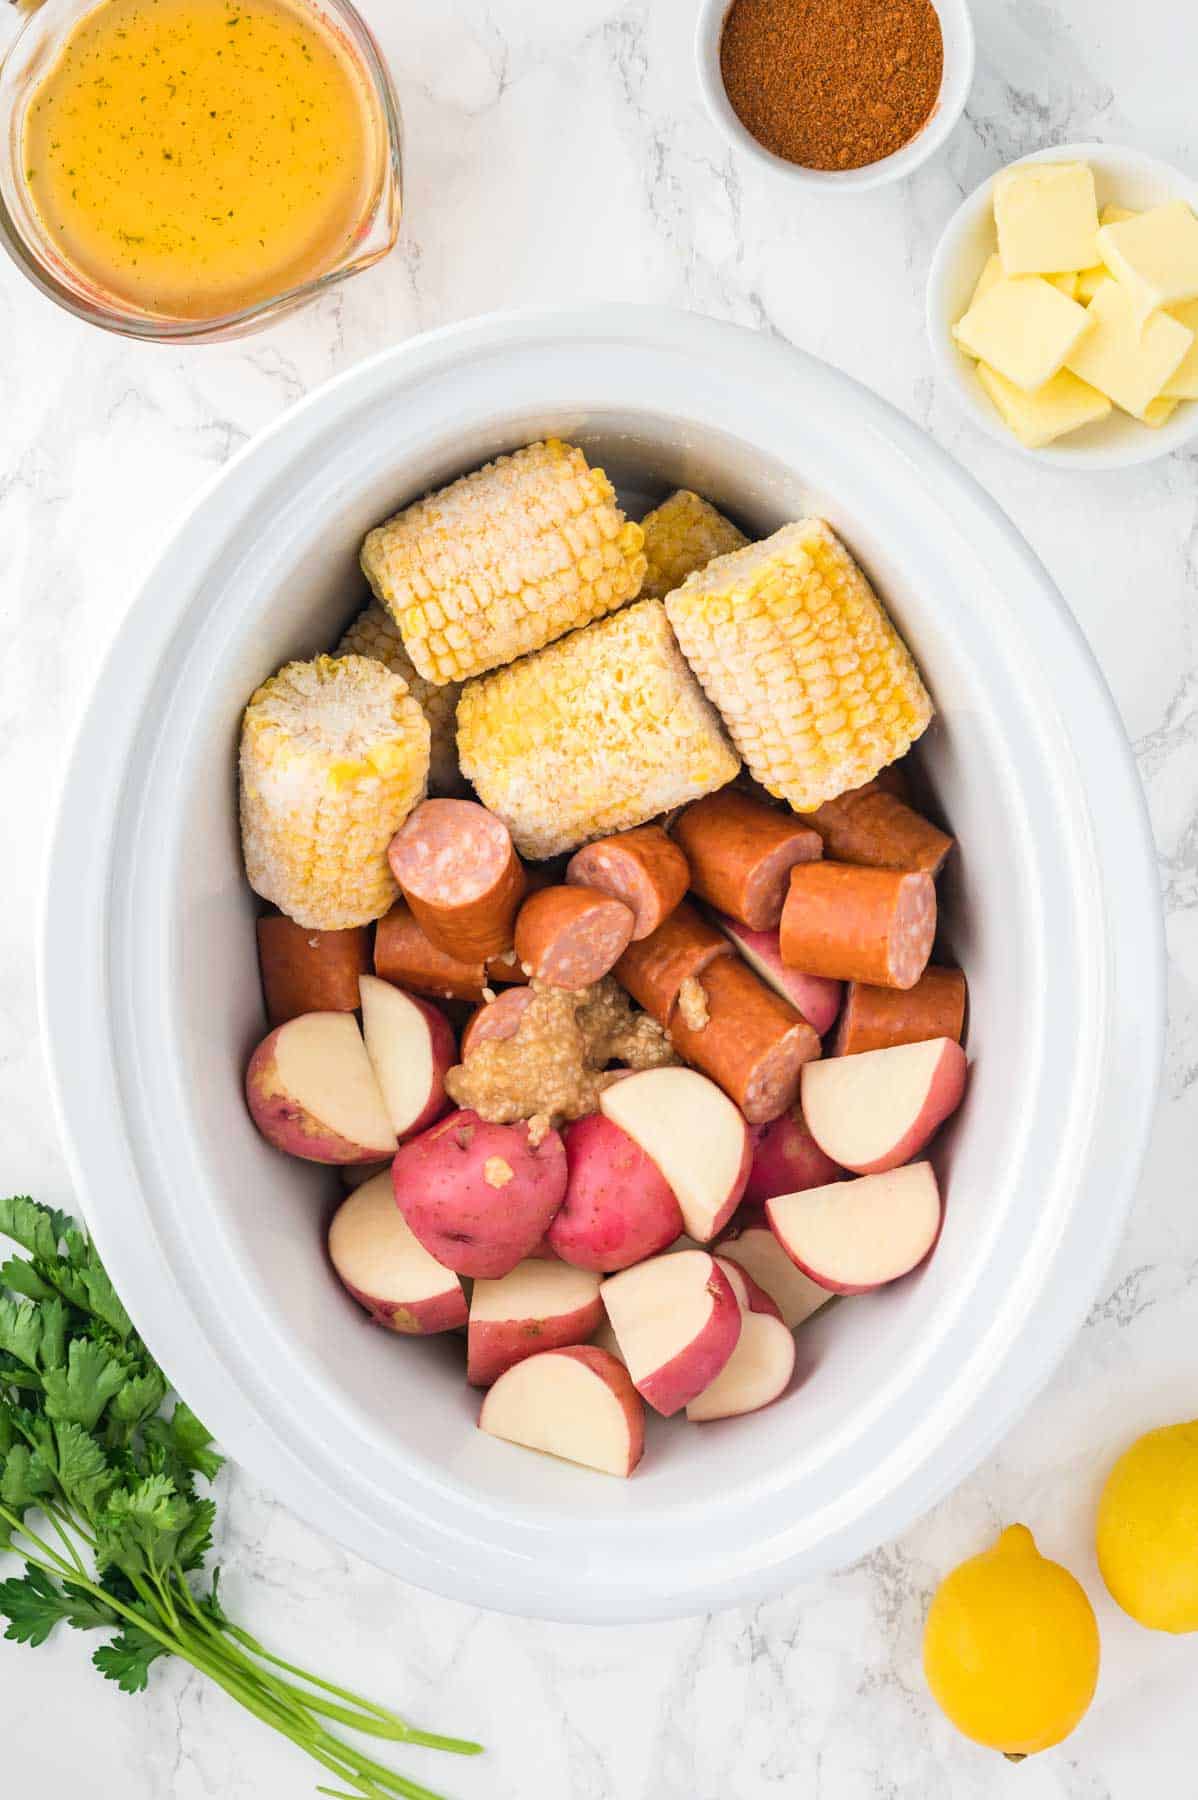 minced garlic, sliced sausage, potatoes and corn on the cob in a crock pot